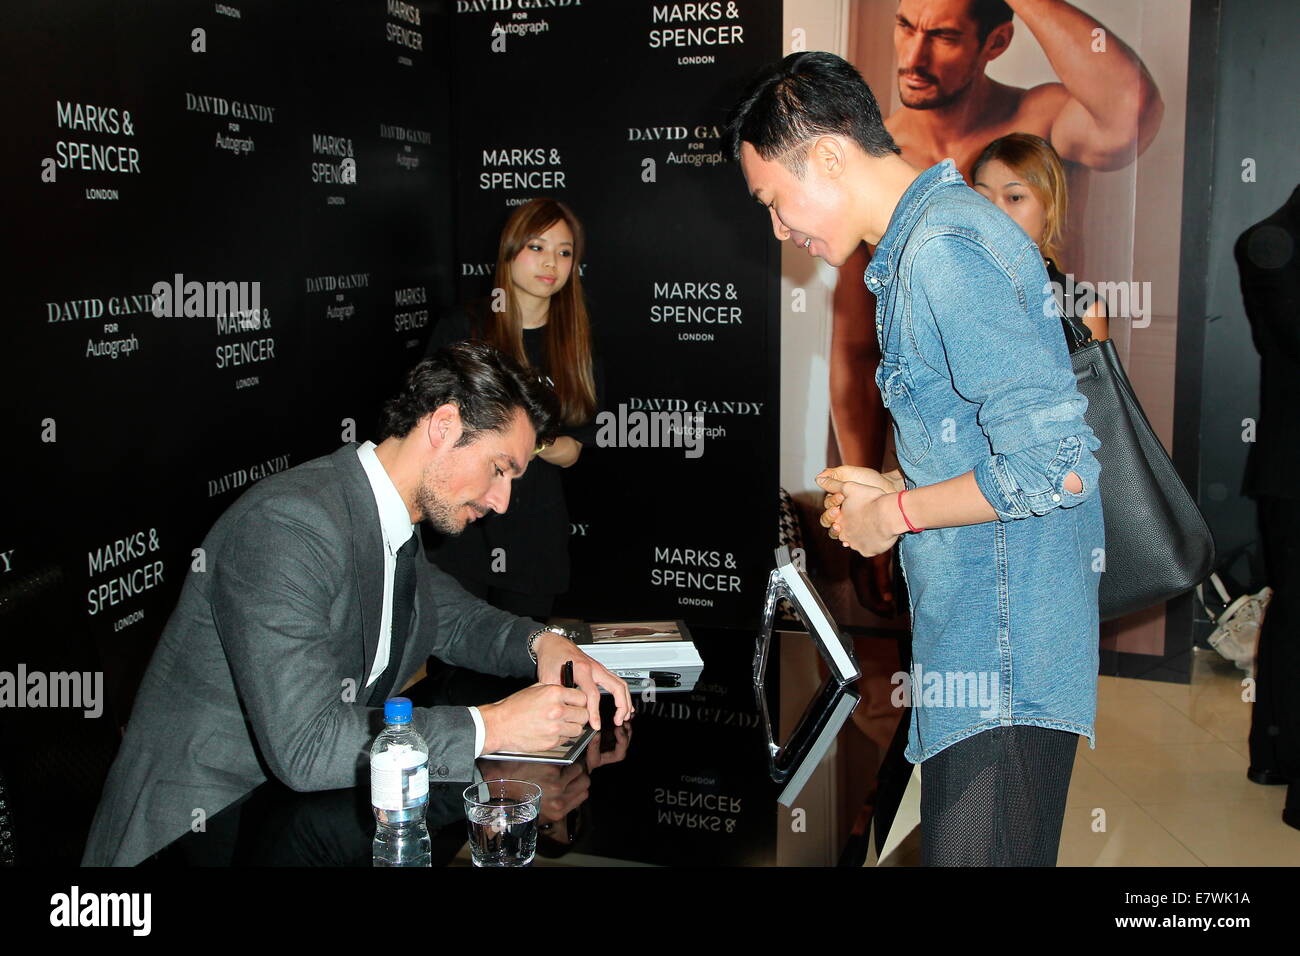 Super model David Gandy attends the fans meeting conference at Marks & Spencer in Hongkong, China on 23th September, 2014. Stock Photo